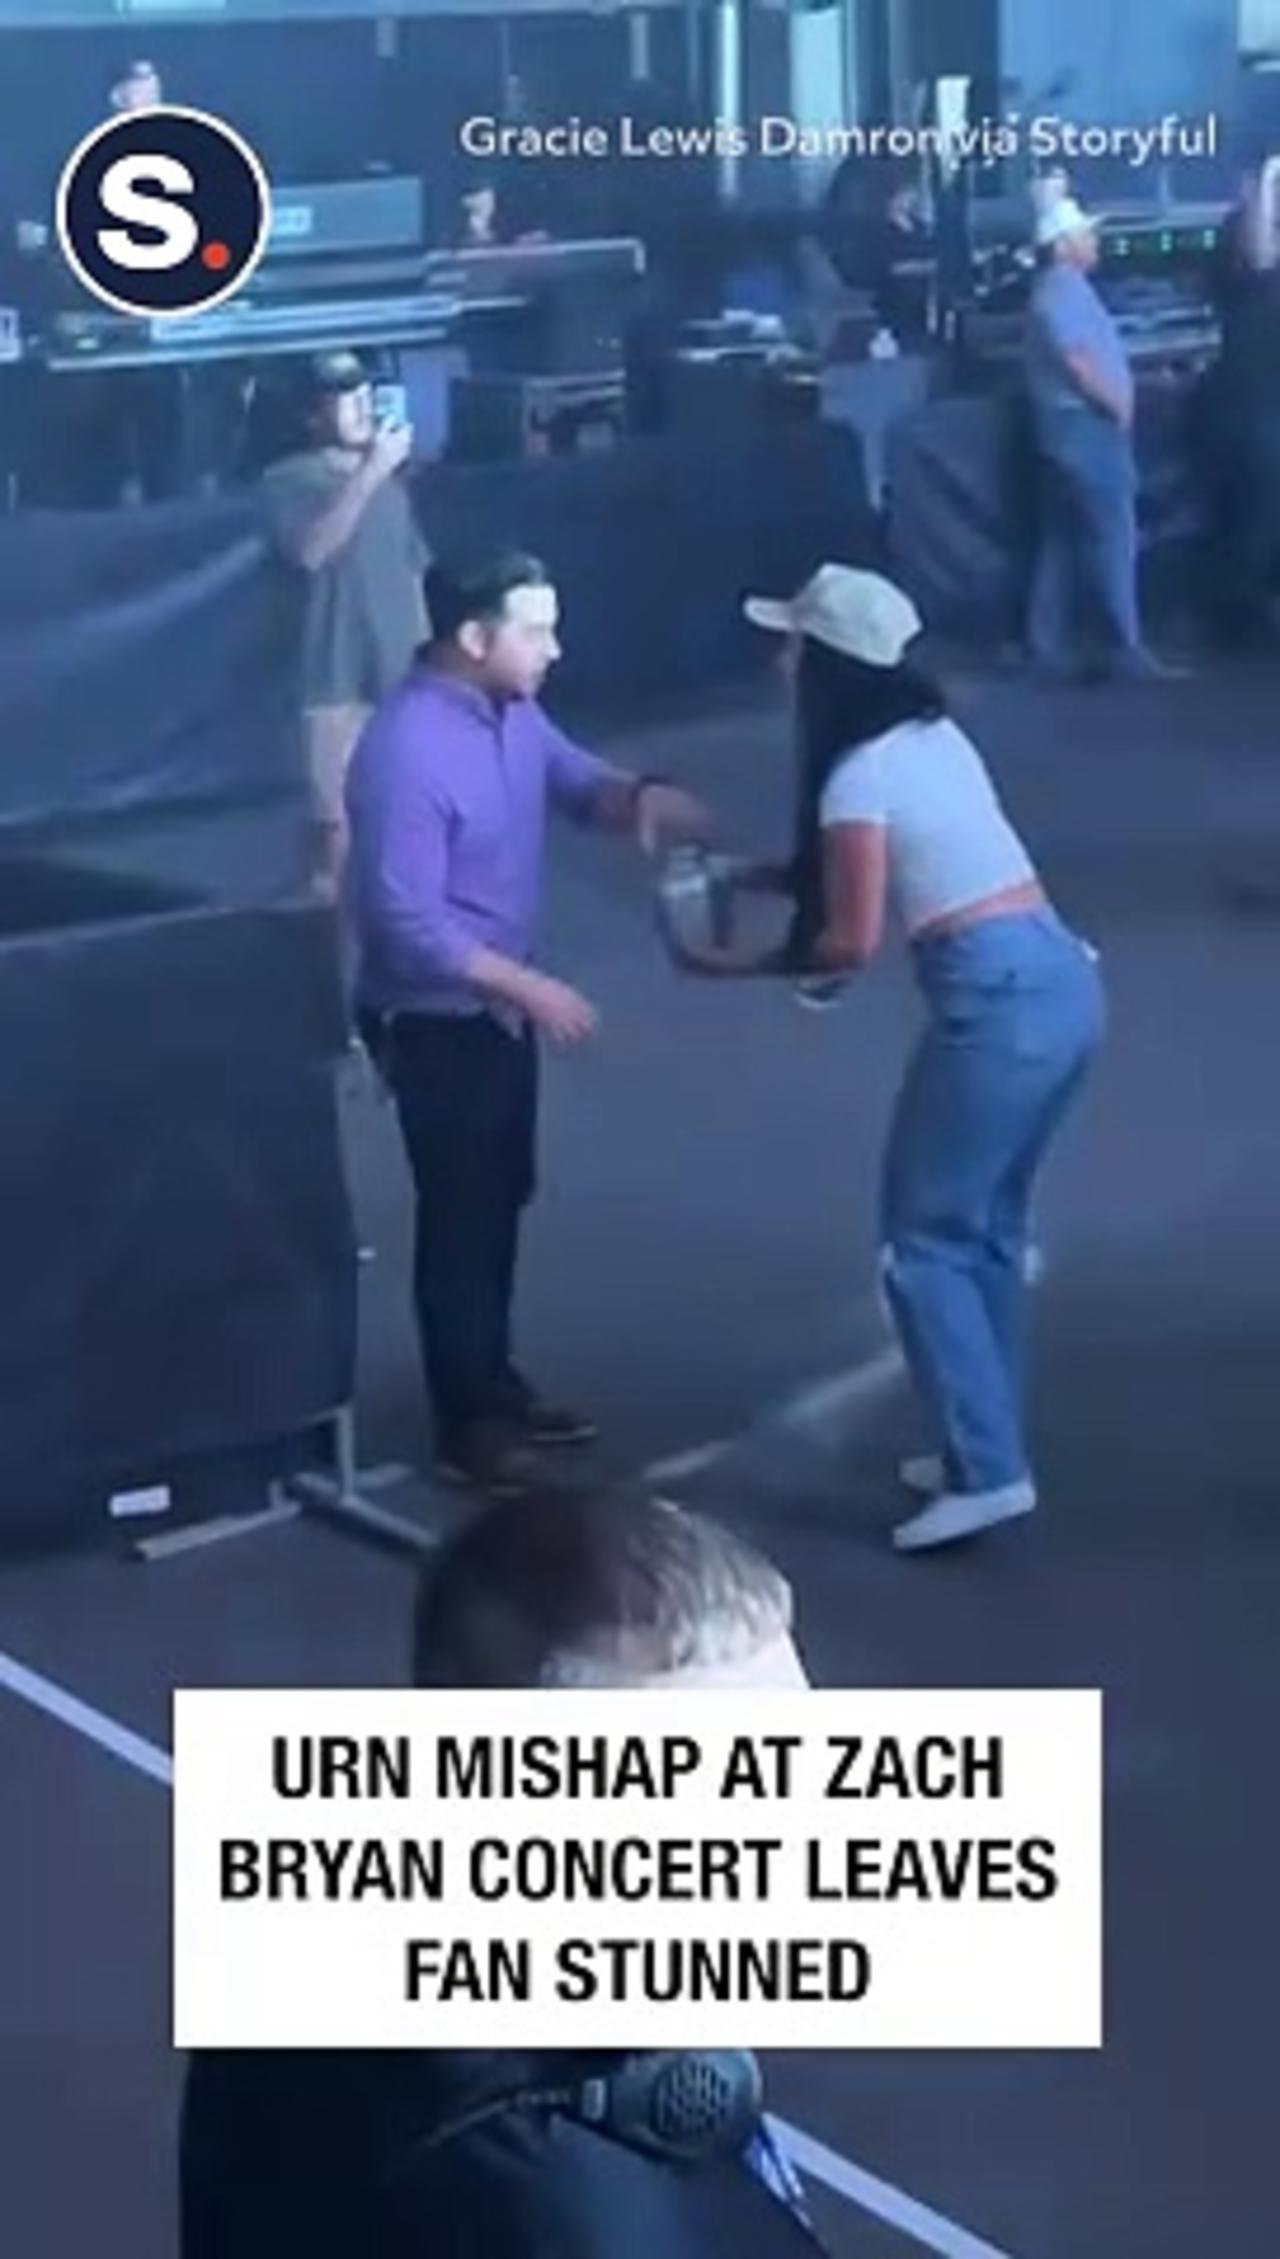 Urn Mishap at Zach Bryan Concert Leaves Fan Stunned